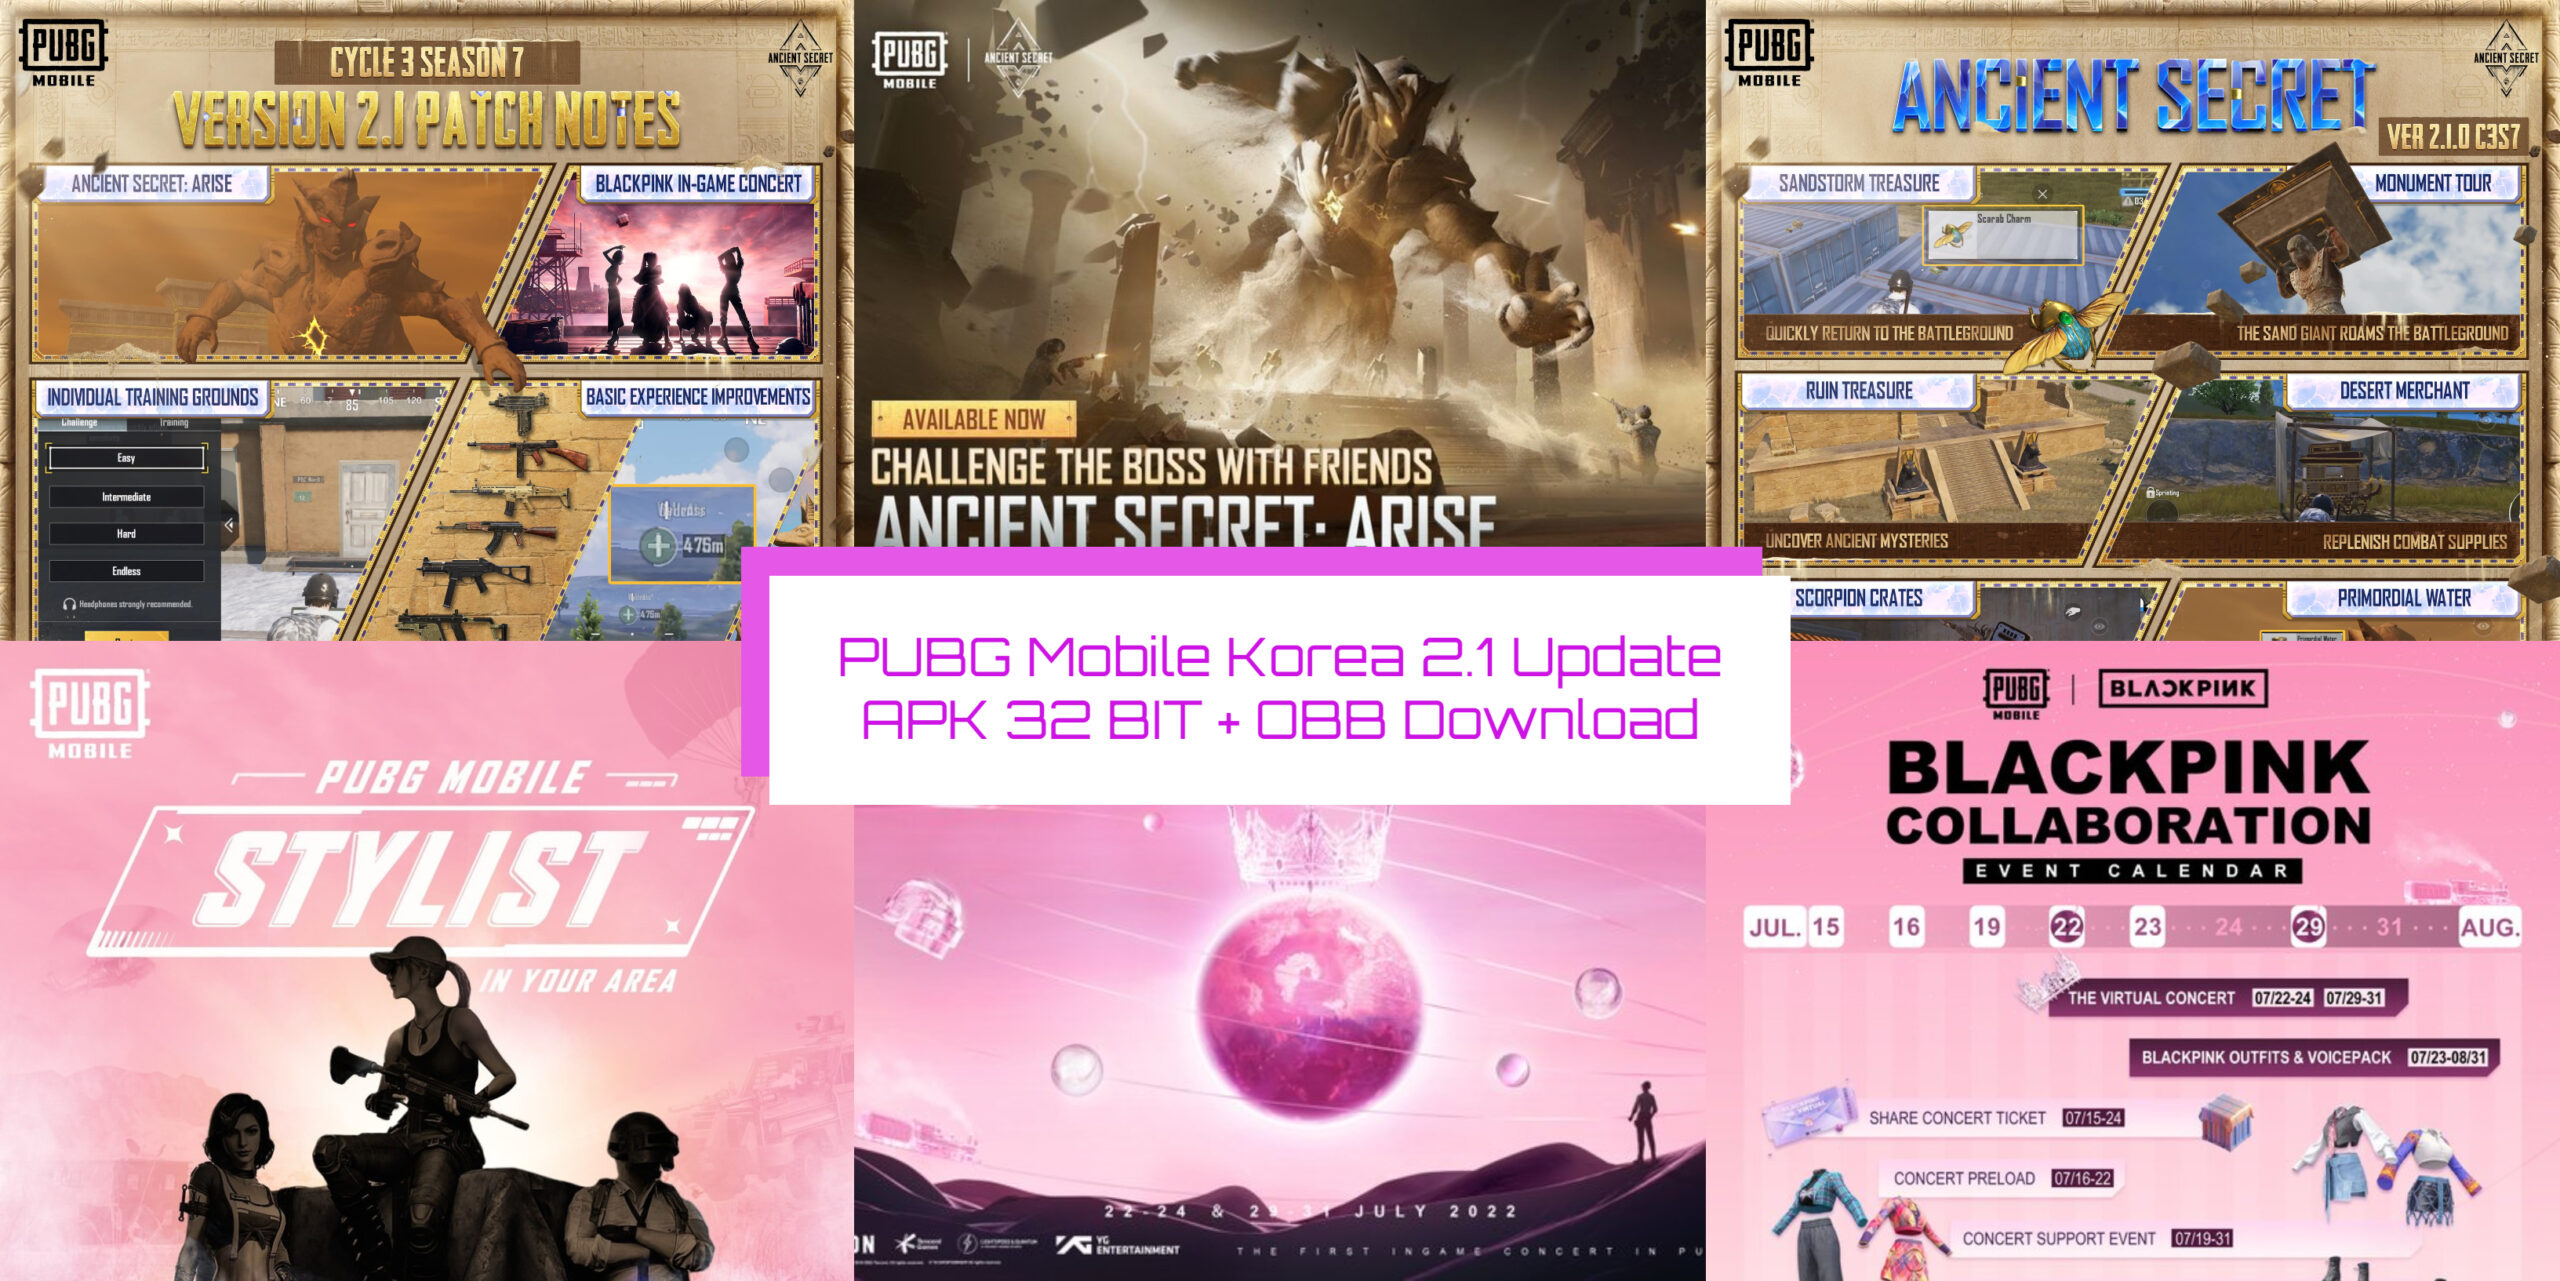 You are currently viewing PUBG Mobile Korea 2.1.0 Update APK 32 BIT + OBB Download